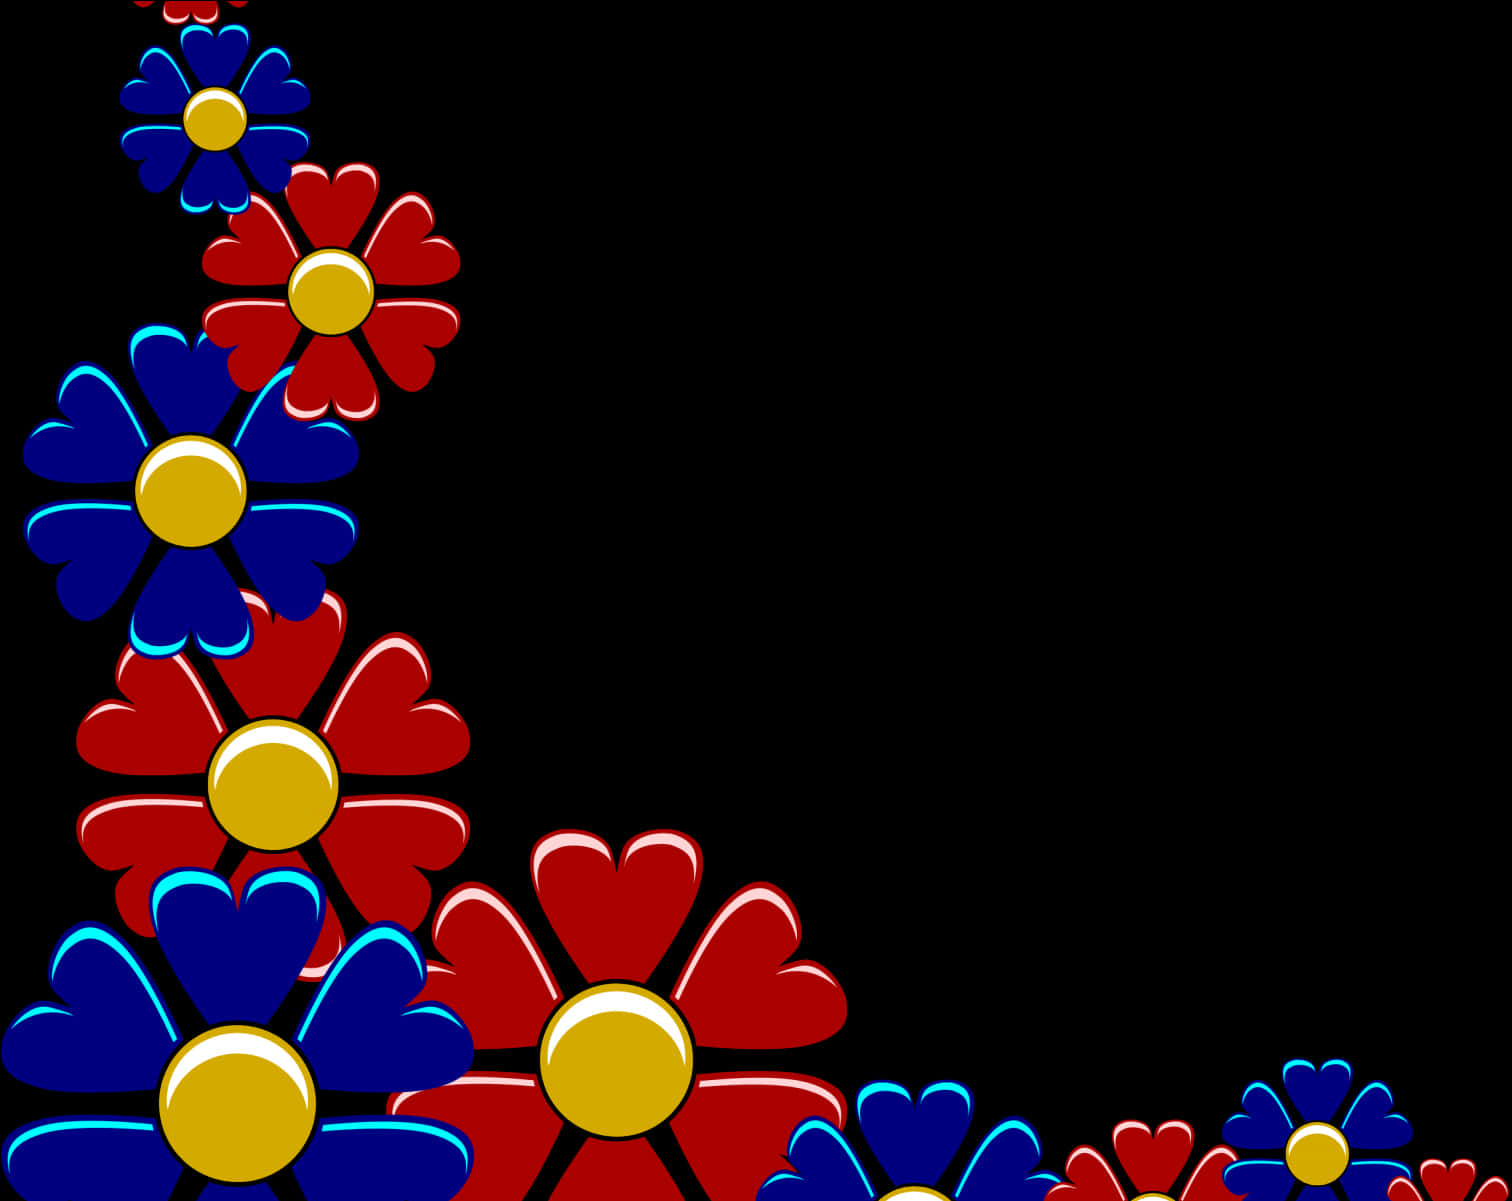 A Red And Blue Flowers With Yellow Centers